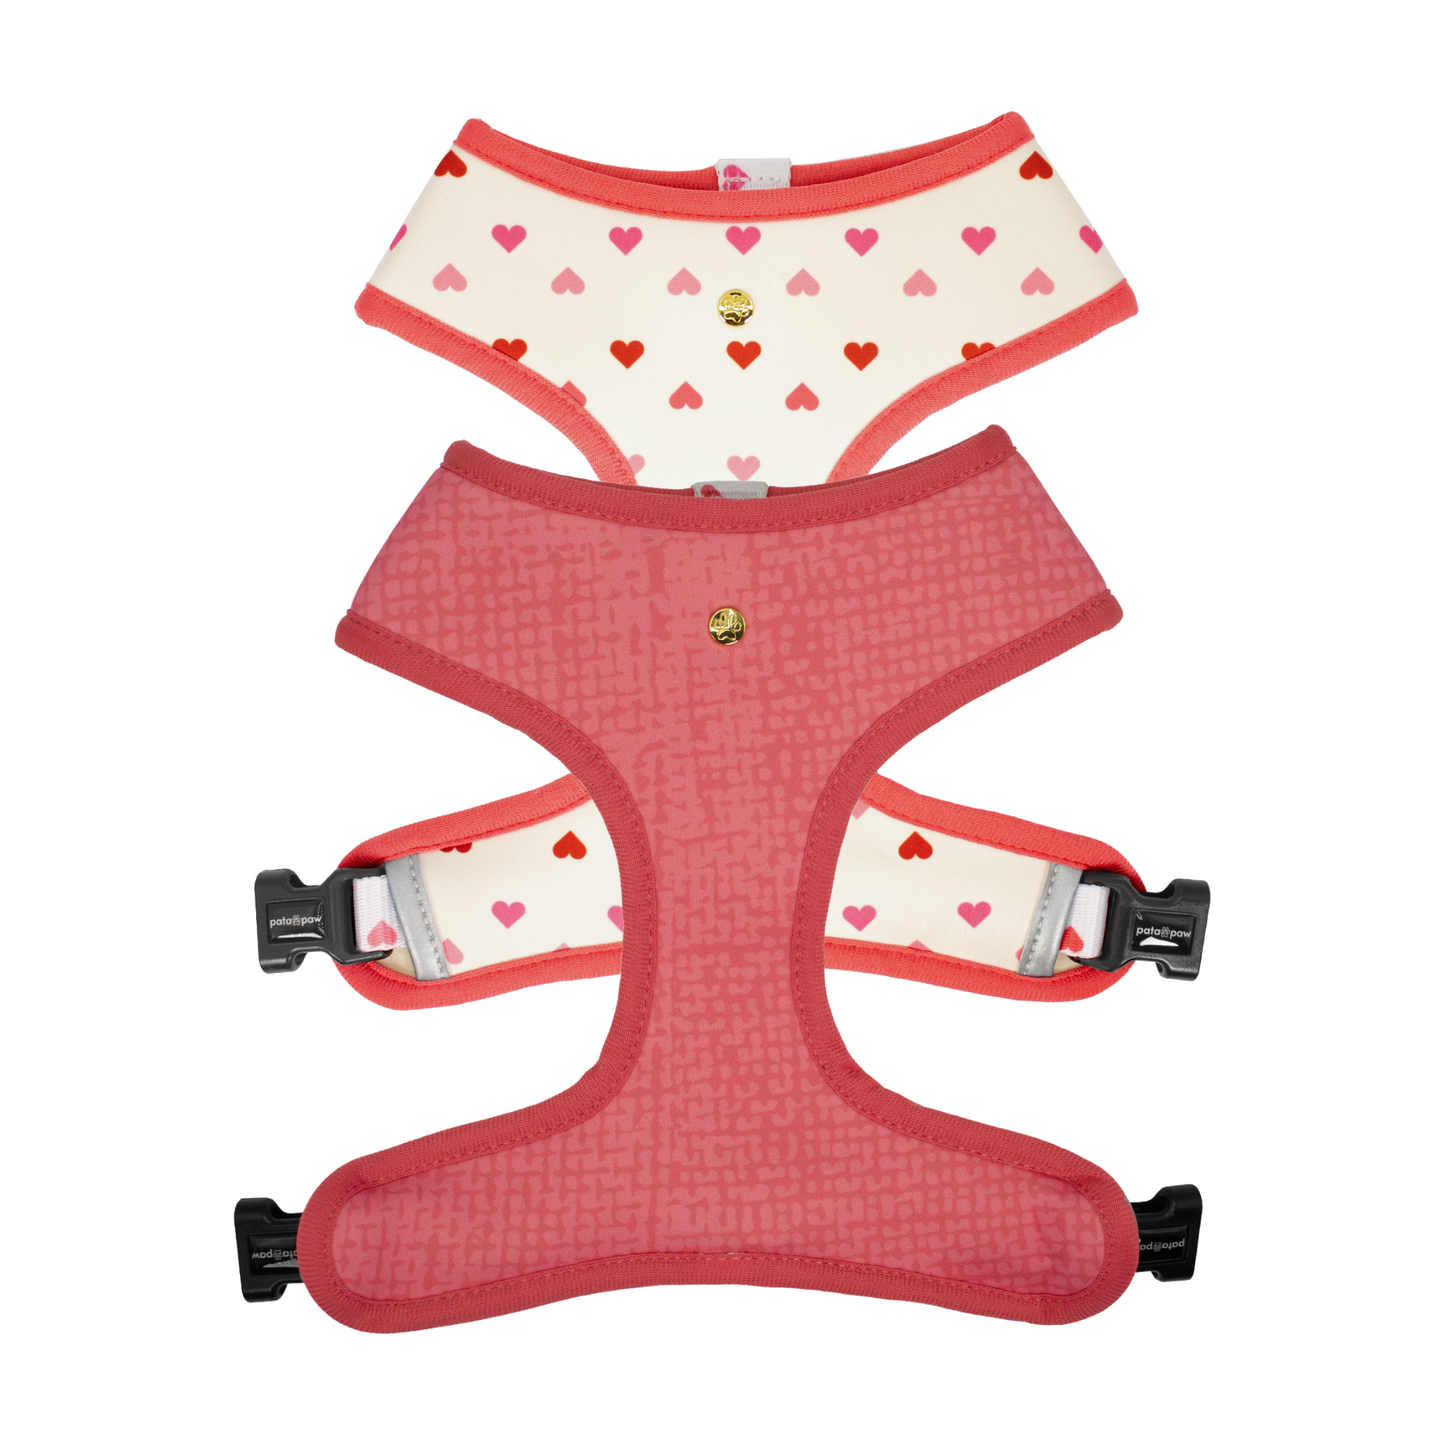 Pata Paw blush hearts reversible harness showing both sides.